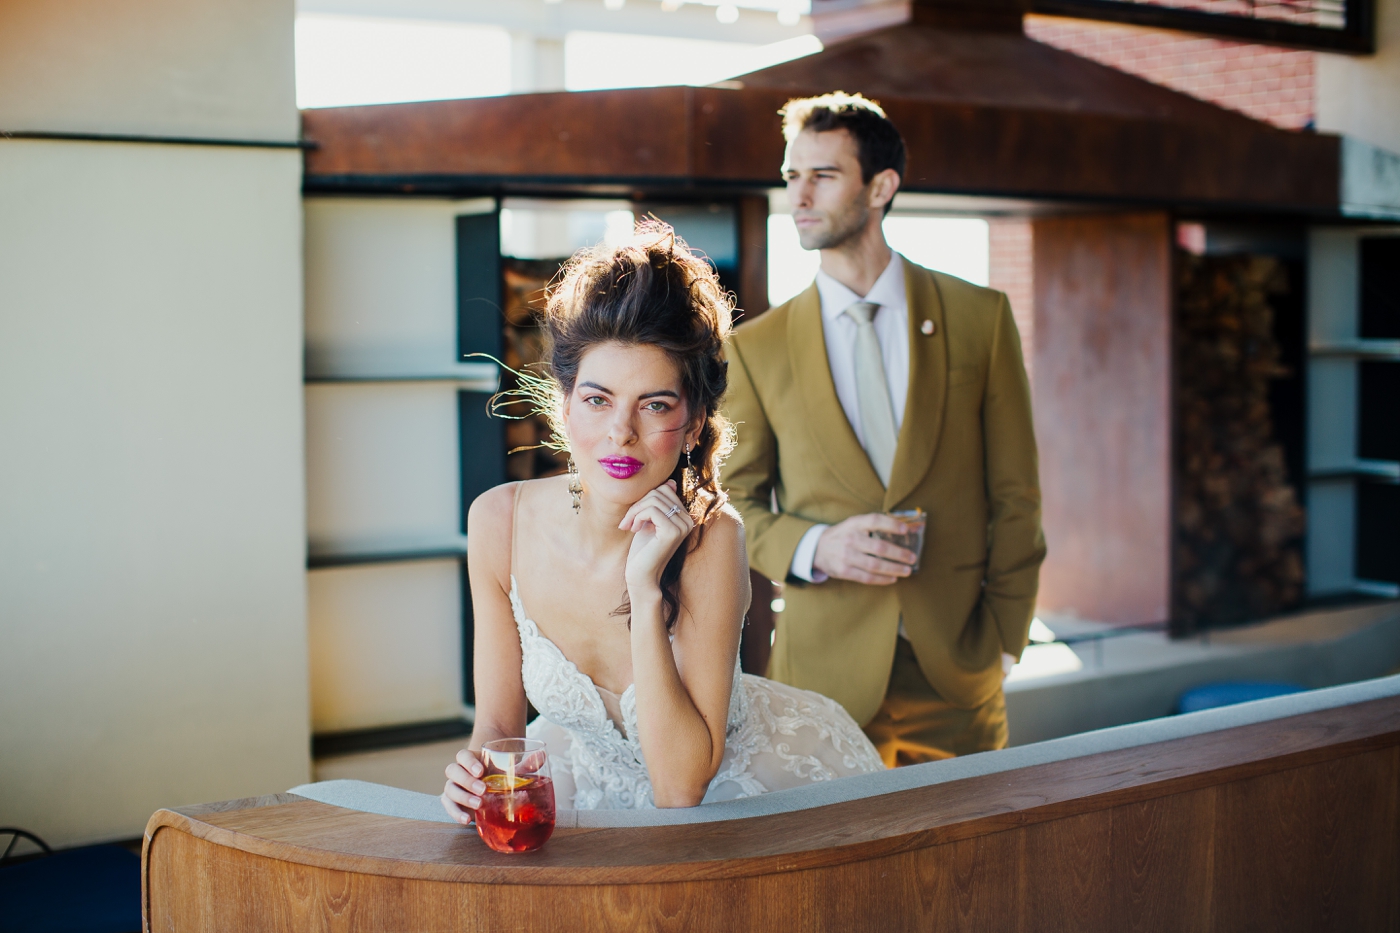 Tips For Planning a Savannah Elopement